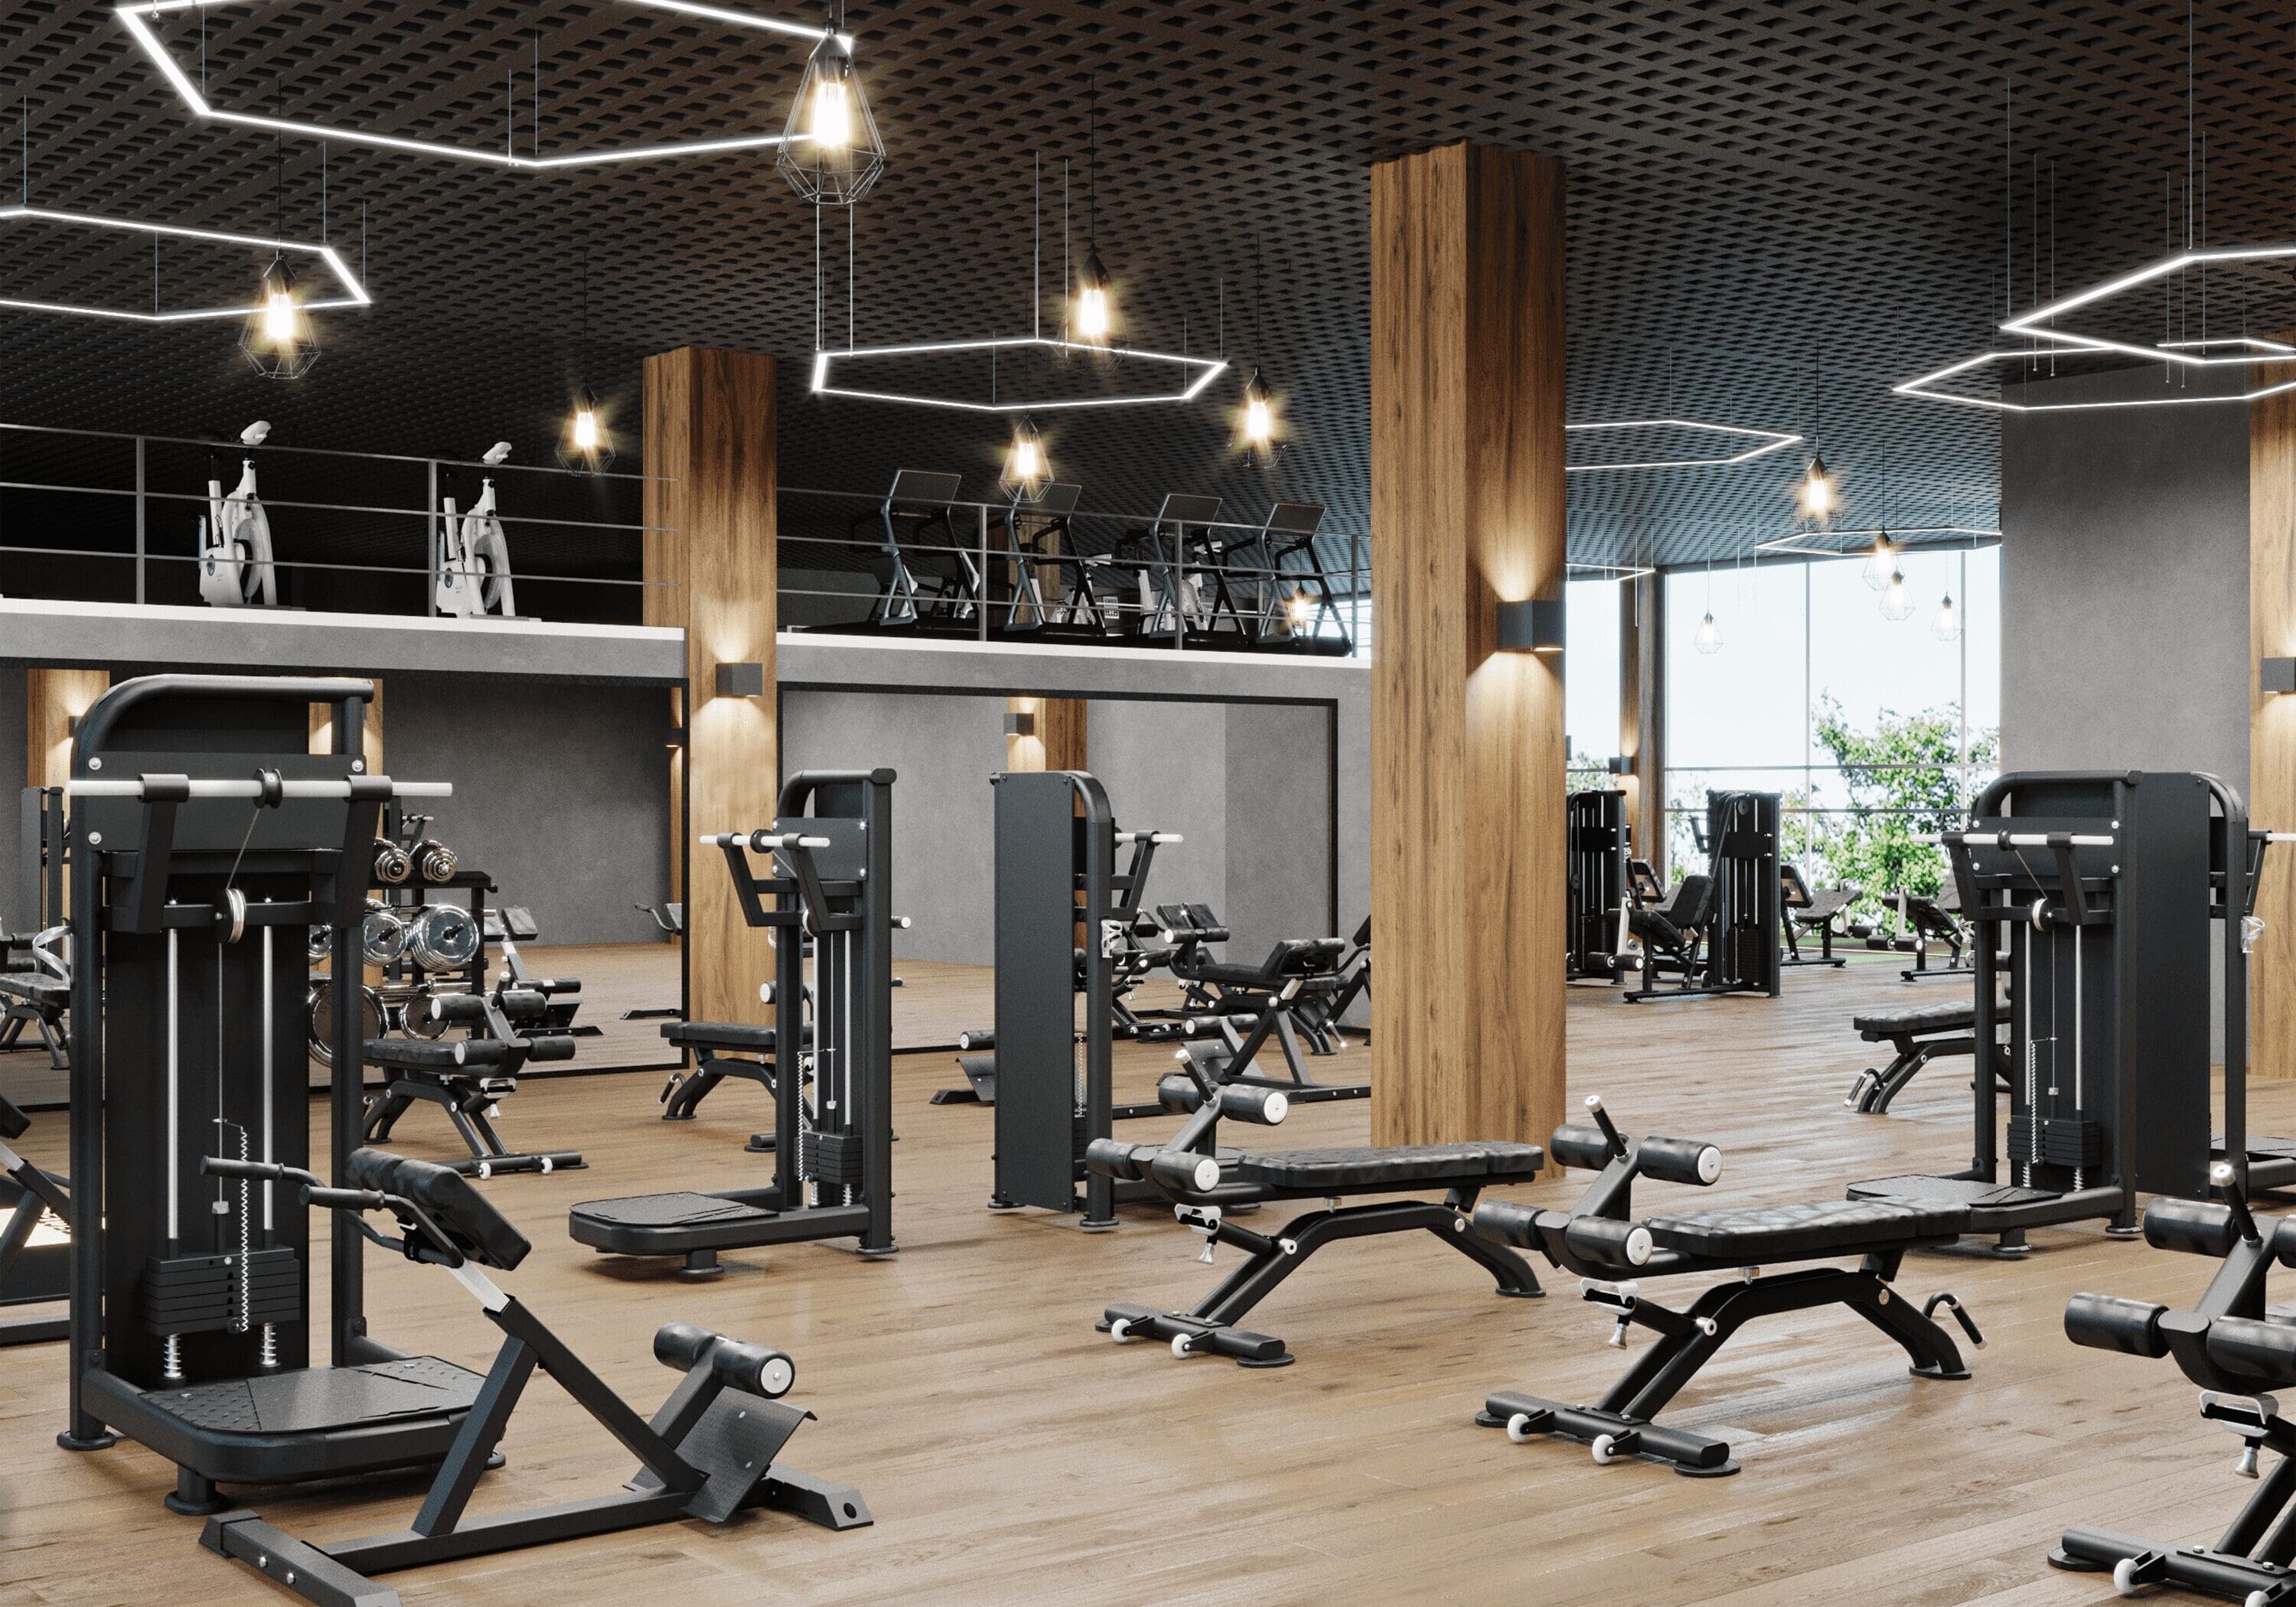 A well-equipped gym room with a range of exercise equipment for a complete workout.